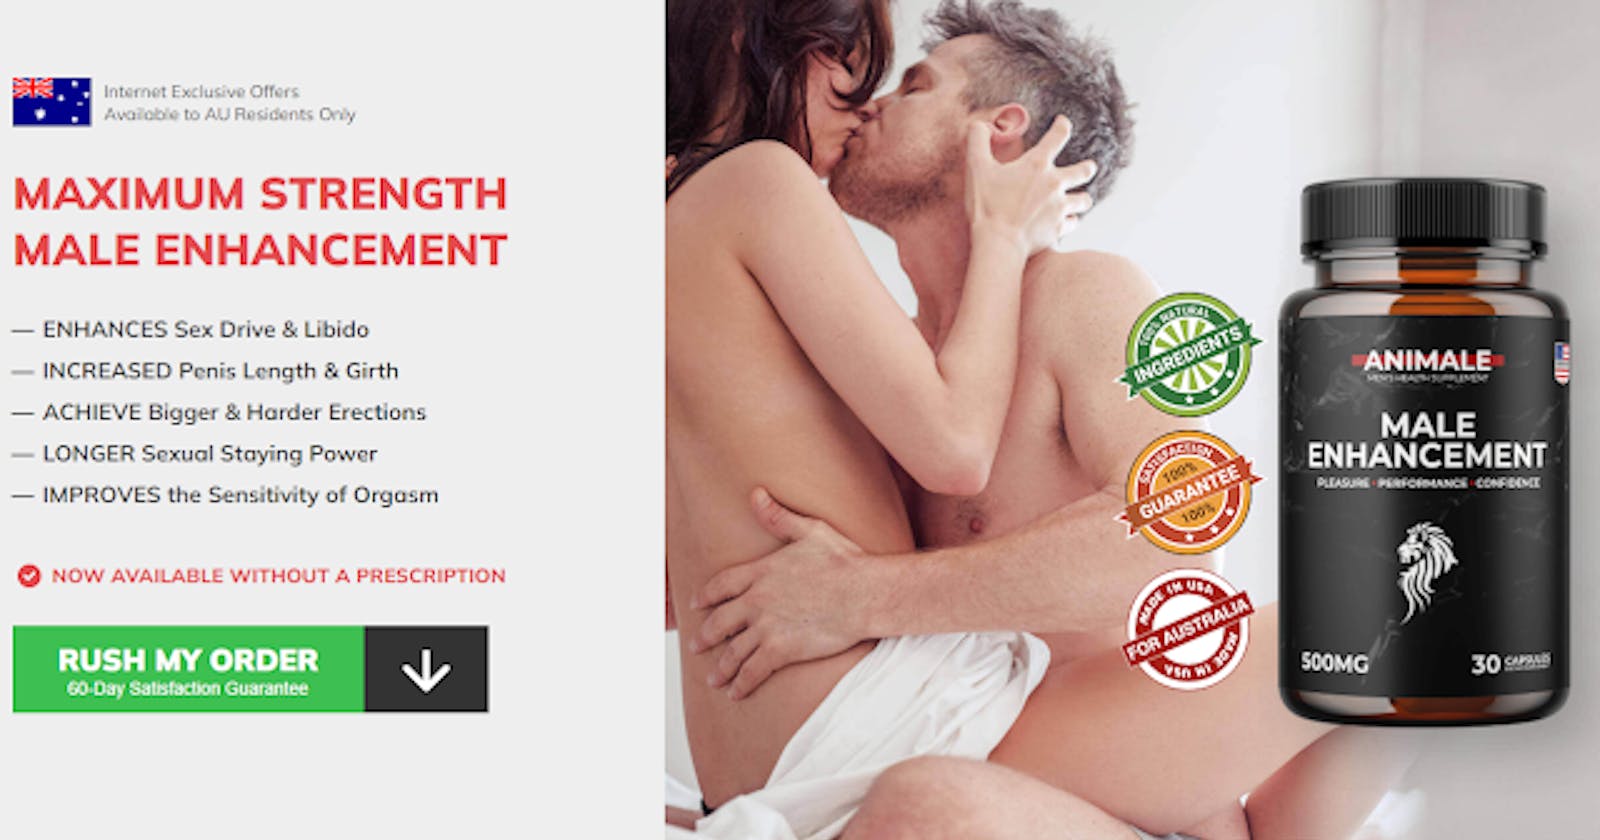 Animale Male Enhancement Capsules South Africa